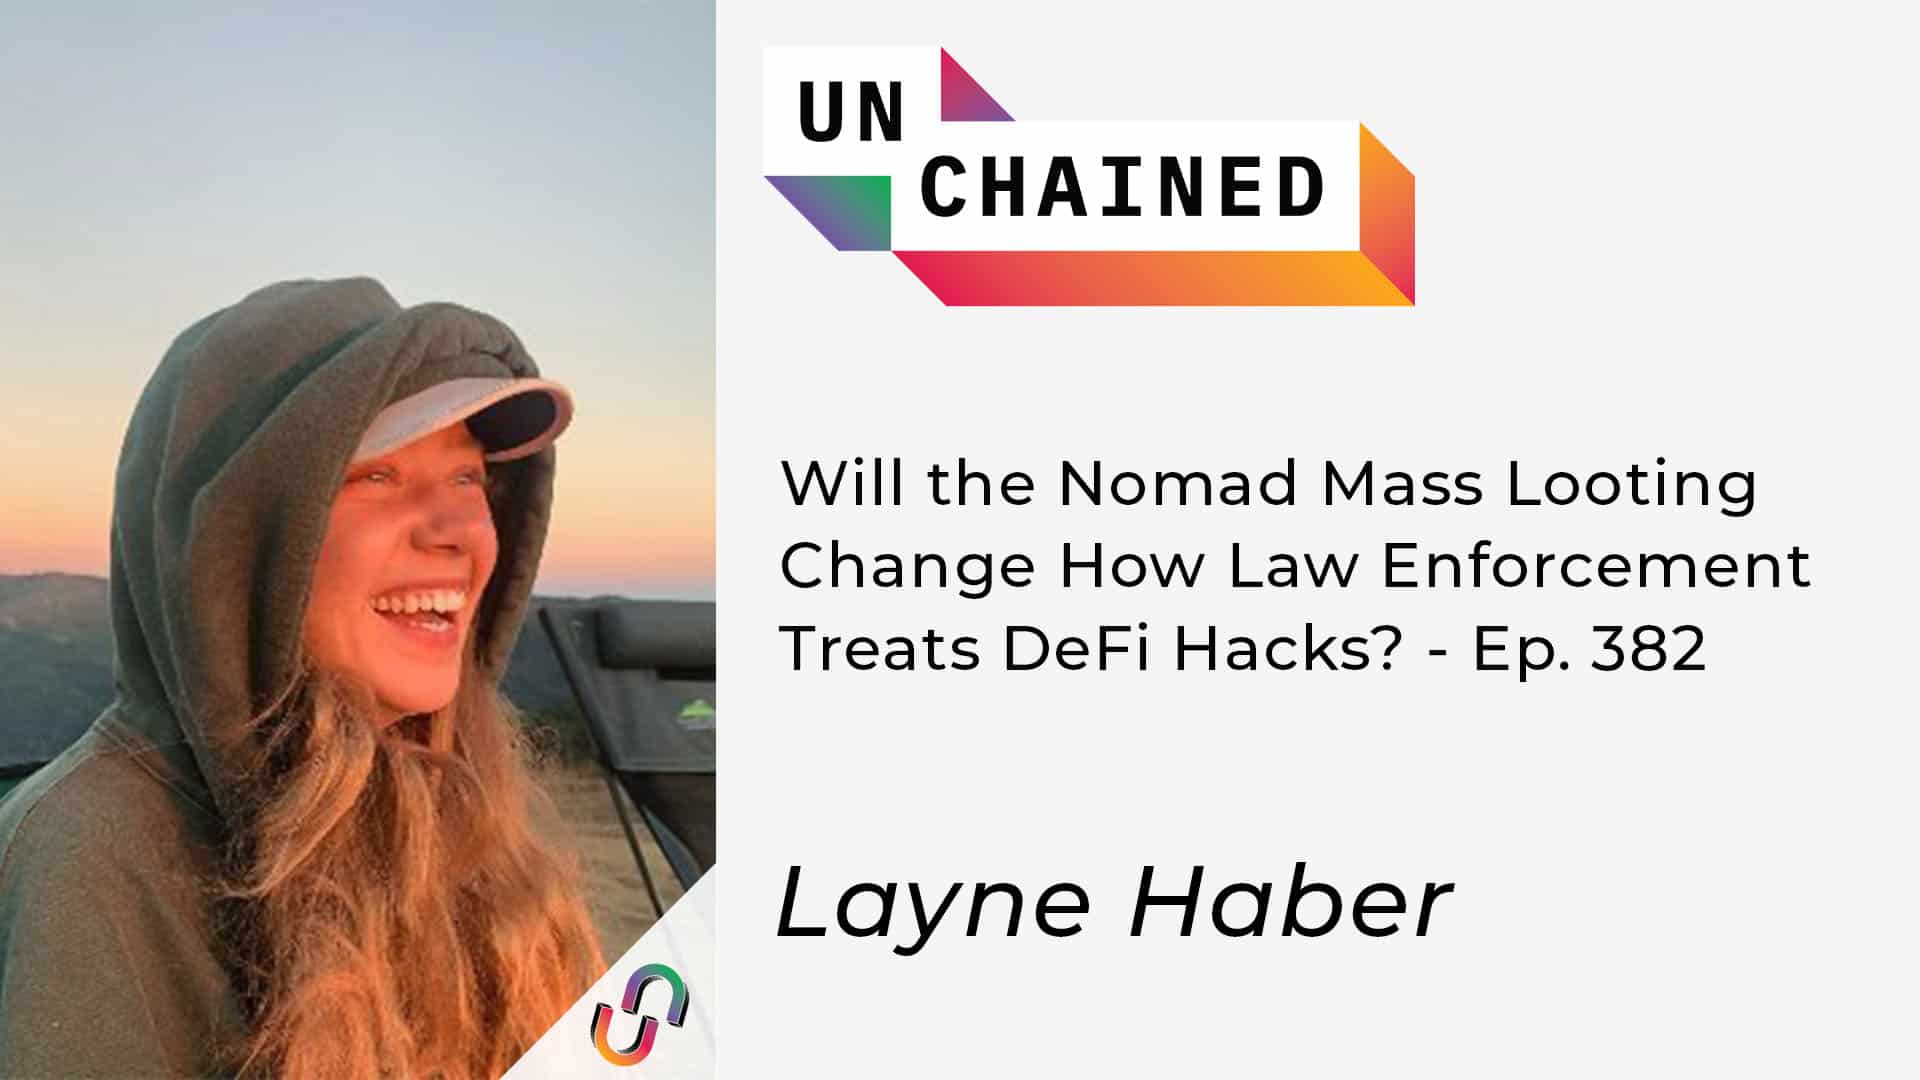 Will the Nomad Mass Looting Change How Law Enforcement Treats DeFi Hacks? – Ep. 382